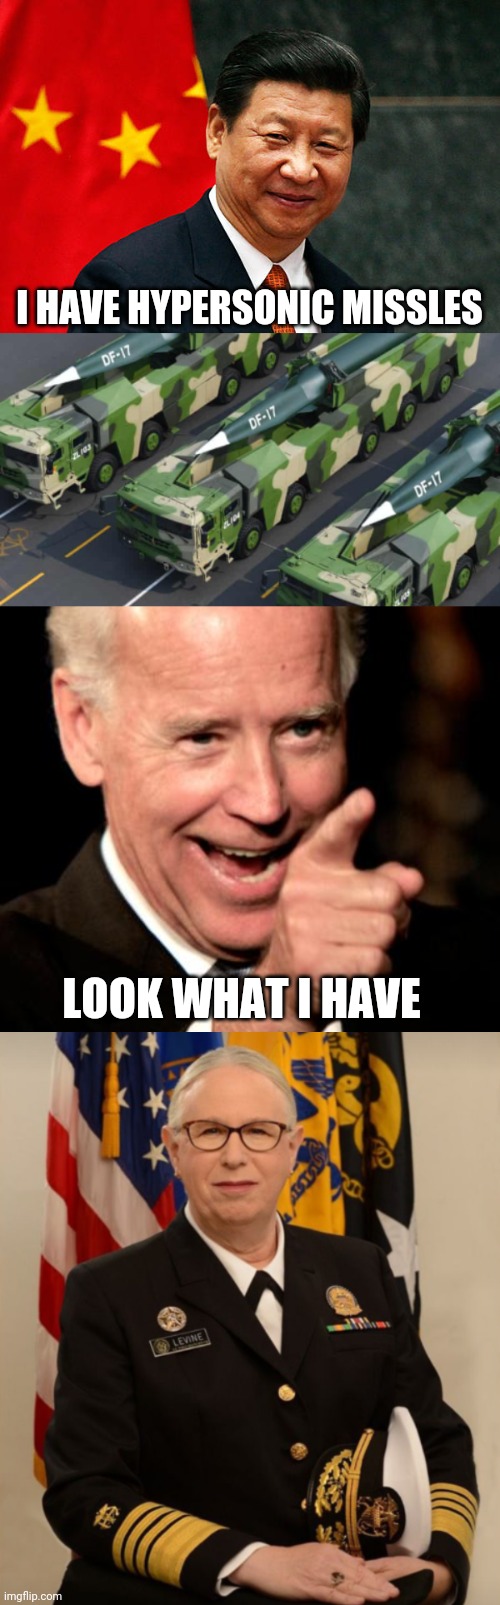 I HAVE HYPERSONIC MISSLES; LOOK WHAT I HAVE | image tagged in xi jinping,memes,smilin biden | made w/ Imgflip meme maker